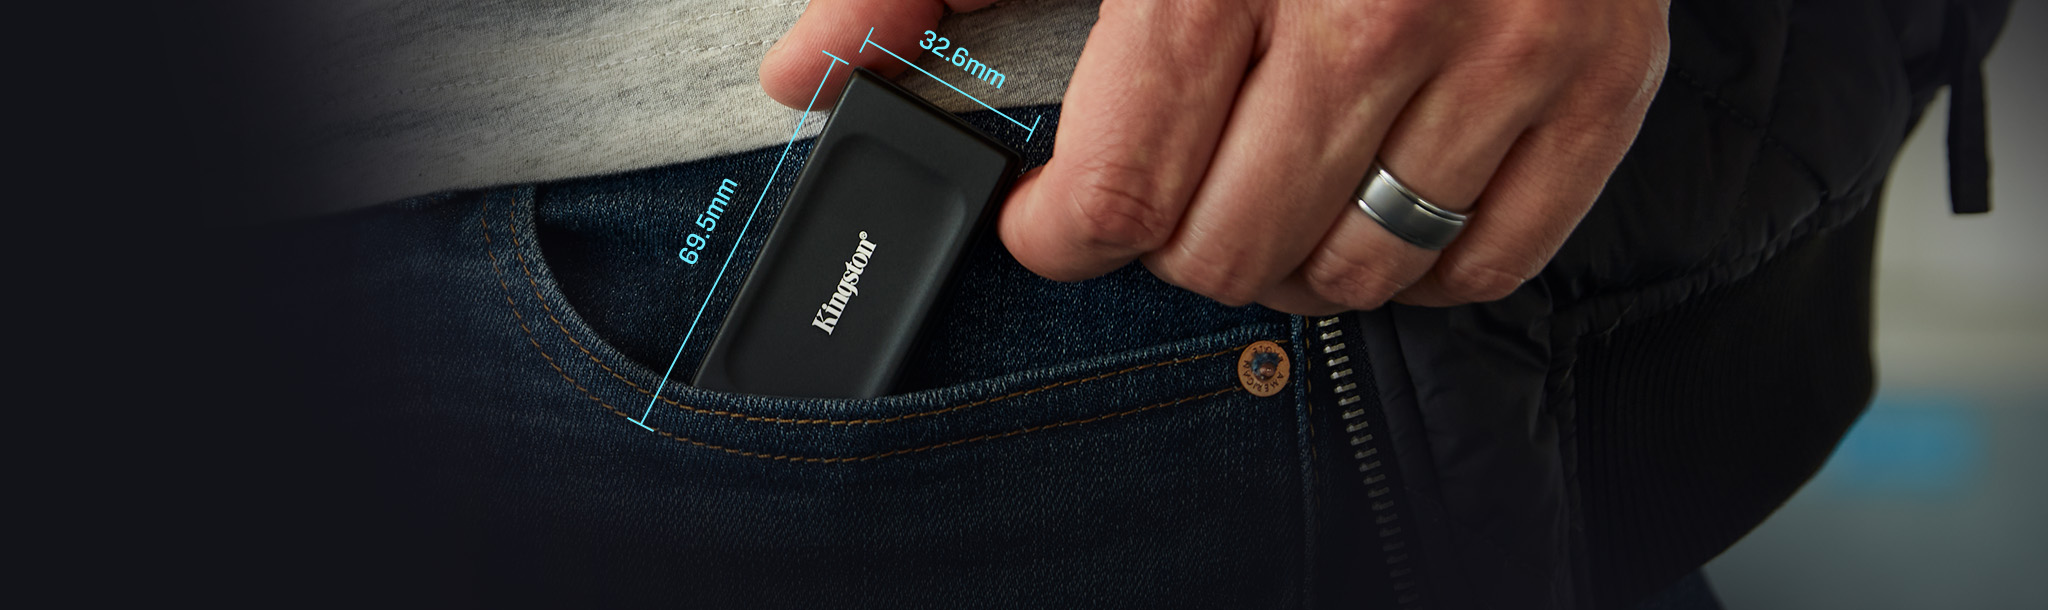 A hand holding the XS1000 portable SSD with the dimensions shown: 69.54 x 32.58 x 13.5mm